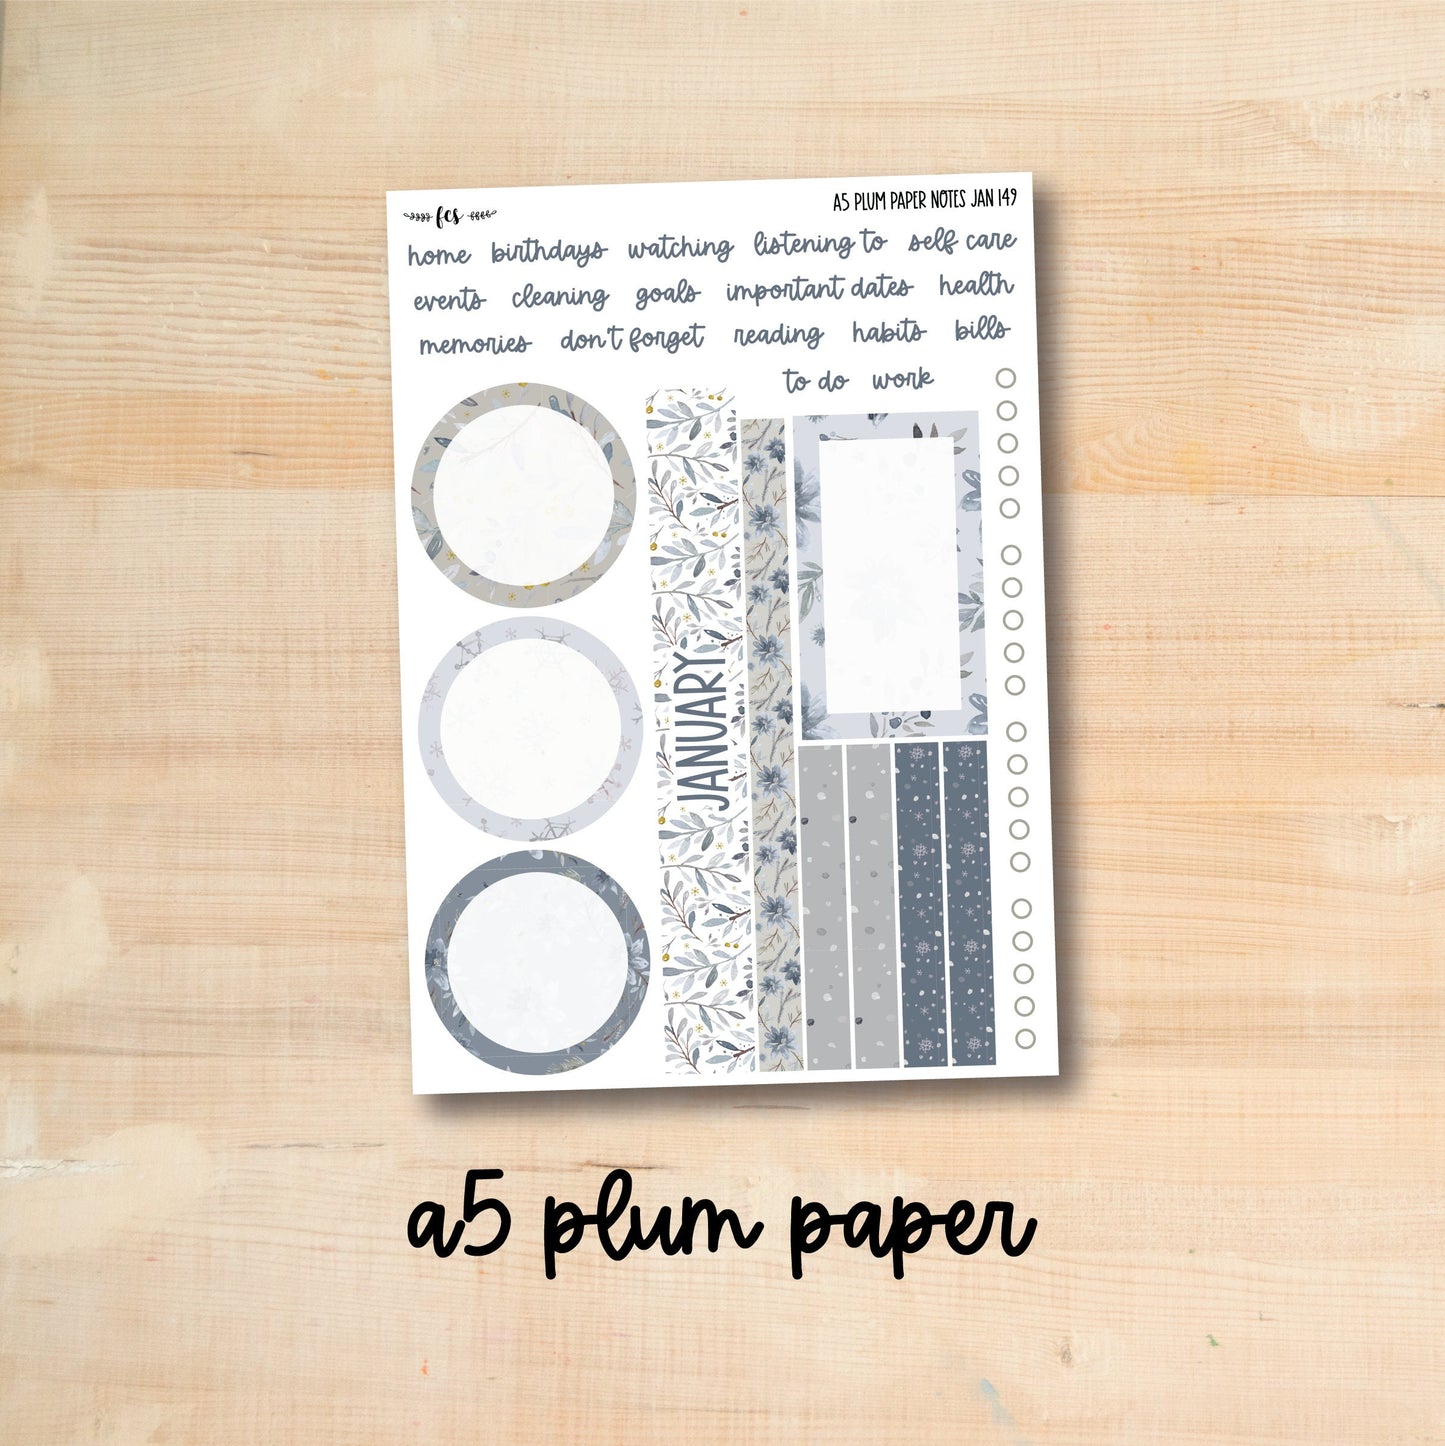 A5 Plum NOTES-JAN149 || WINTER DAYS A5 Plum Paper January notes page